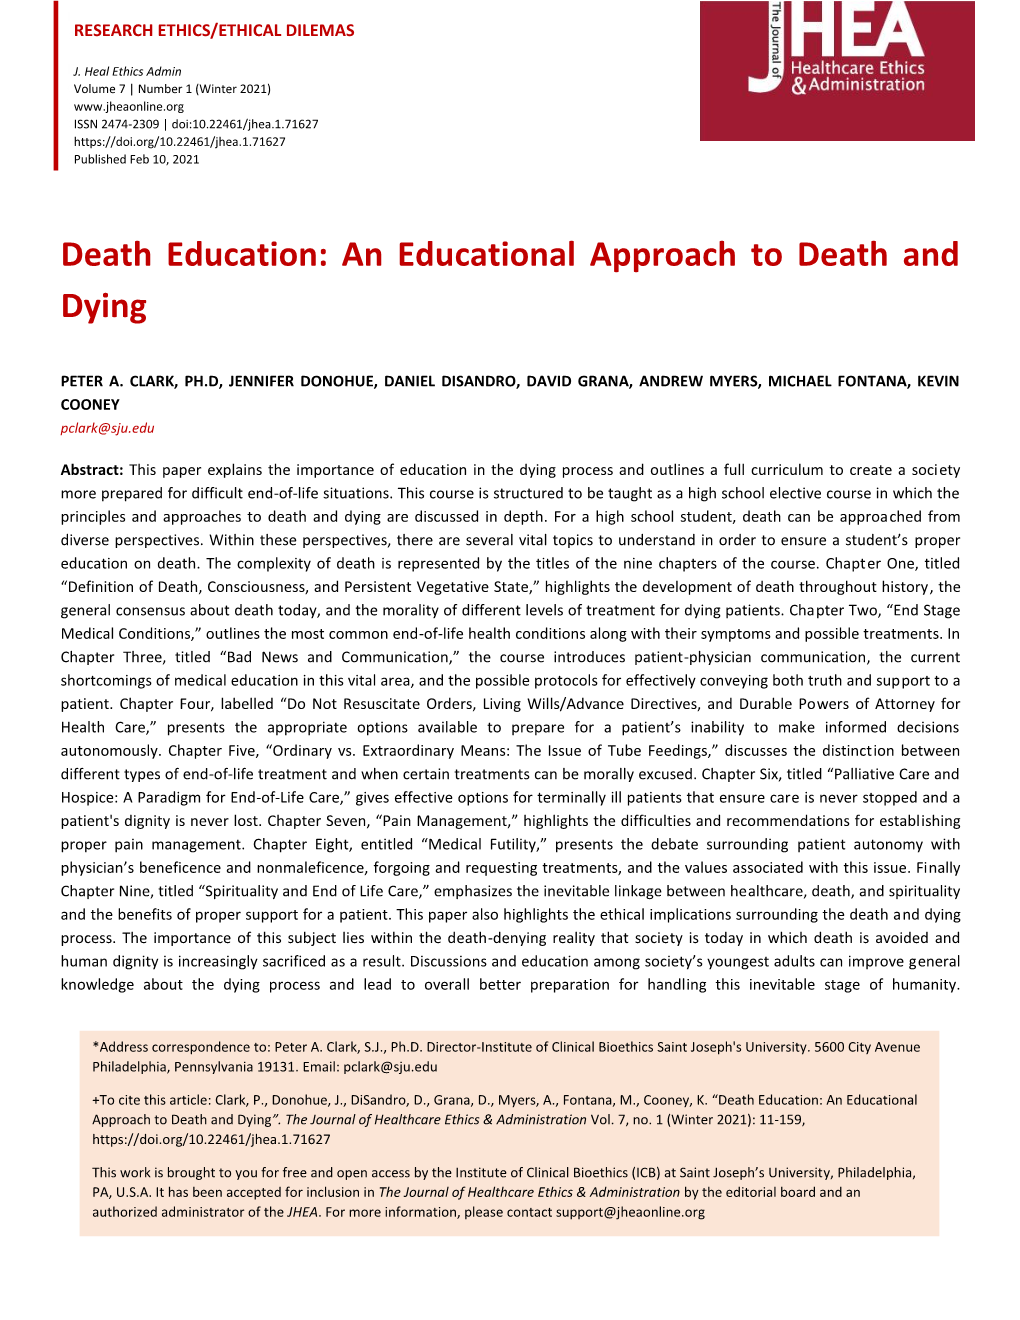 Death Education: an Educational N Approach to Death and Dying”